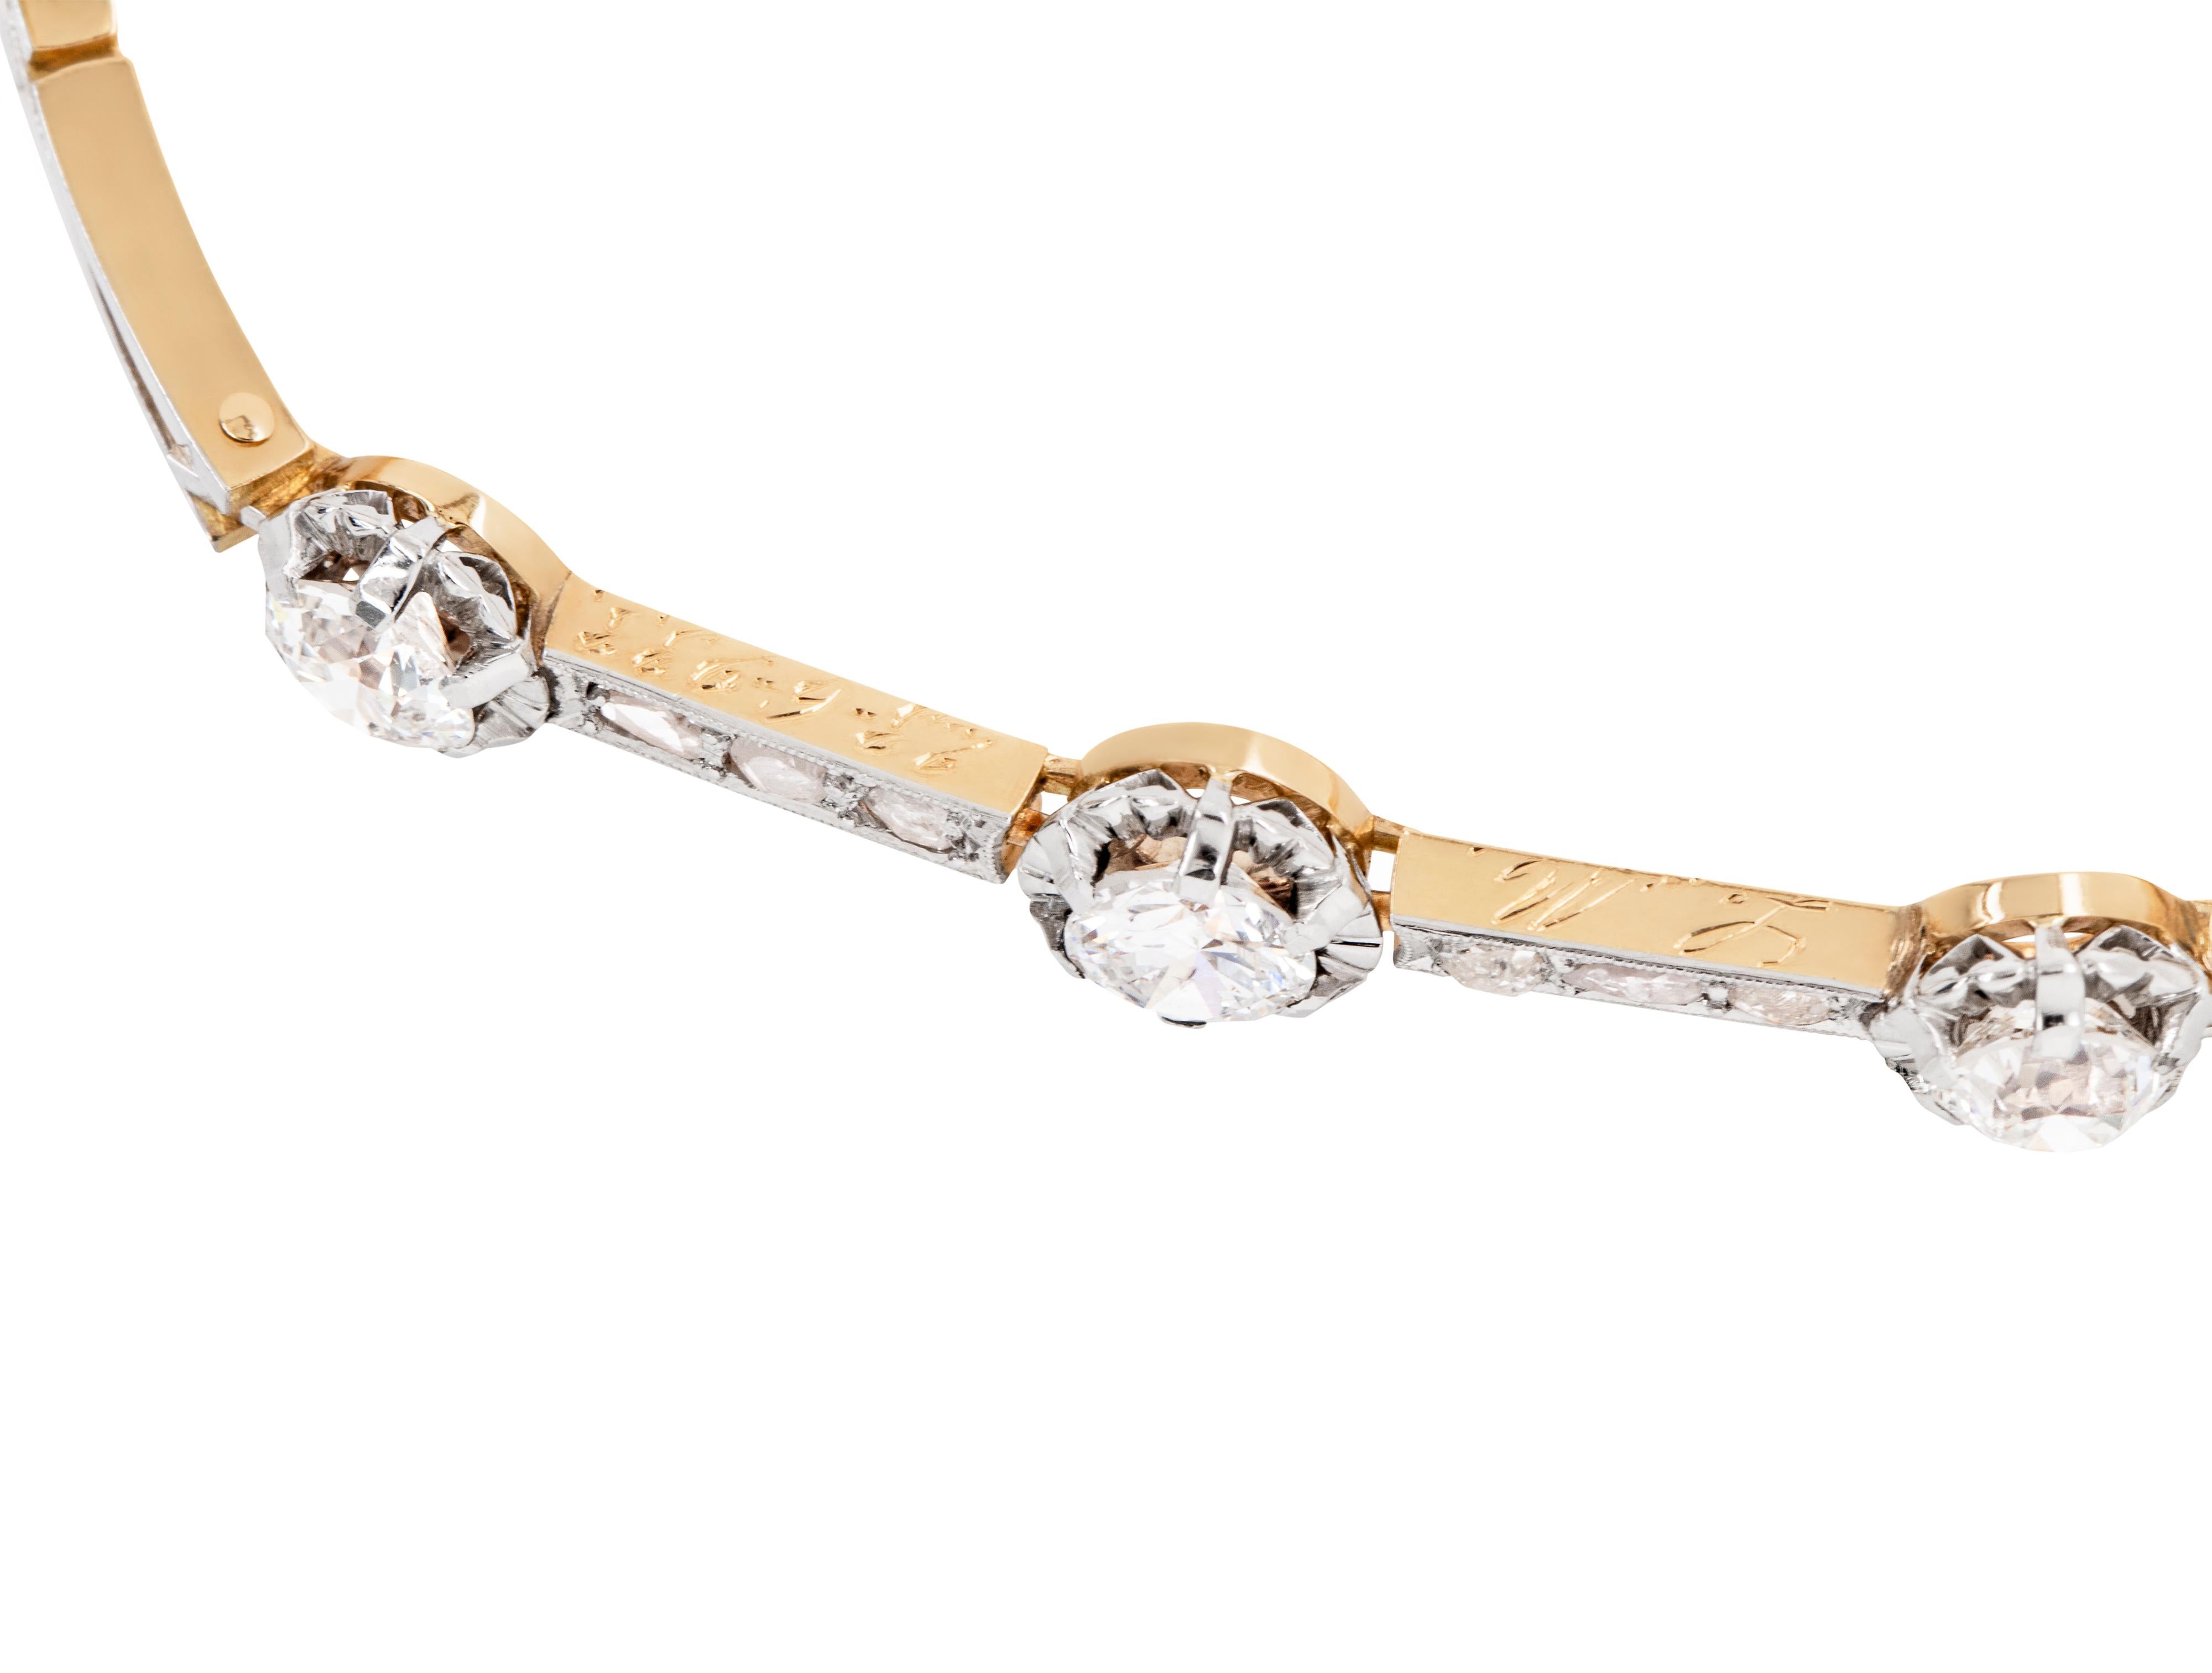 This stunning bracelet features three large old cut diamonds weighing a combined approximate weight of 1.50 carats, each mounted in platinum illusion settings, typical of the Edwardian period. Between the stones are two flat bars inlaid with three